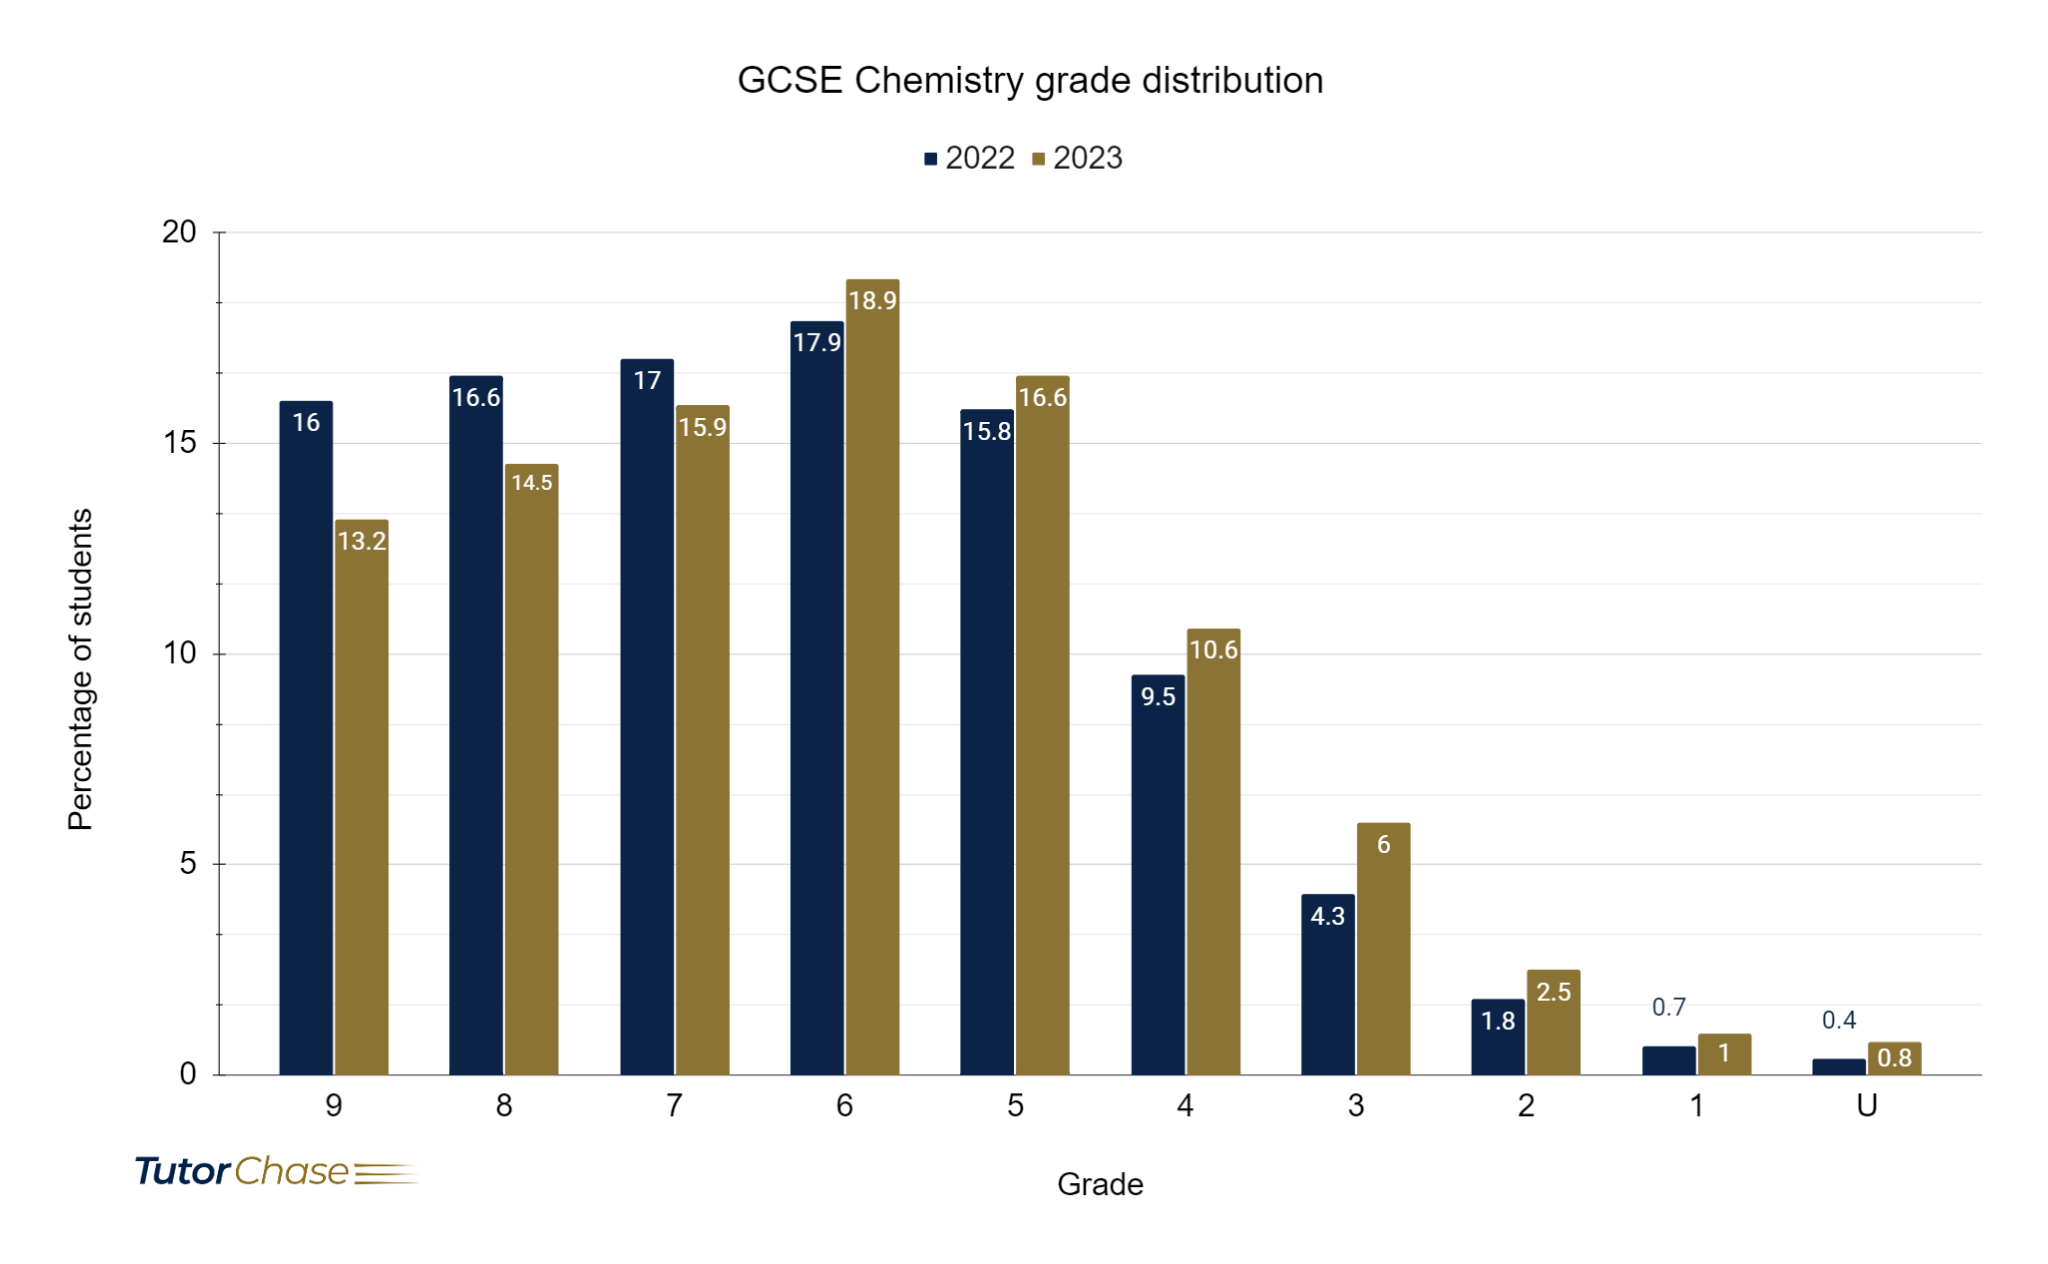 GCSE Chemistry grade distribution for 2022 and 2023